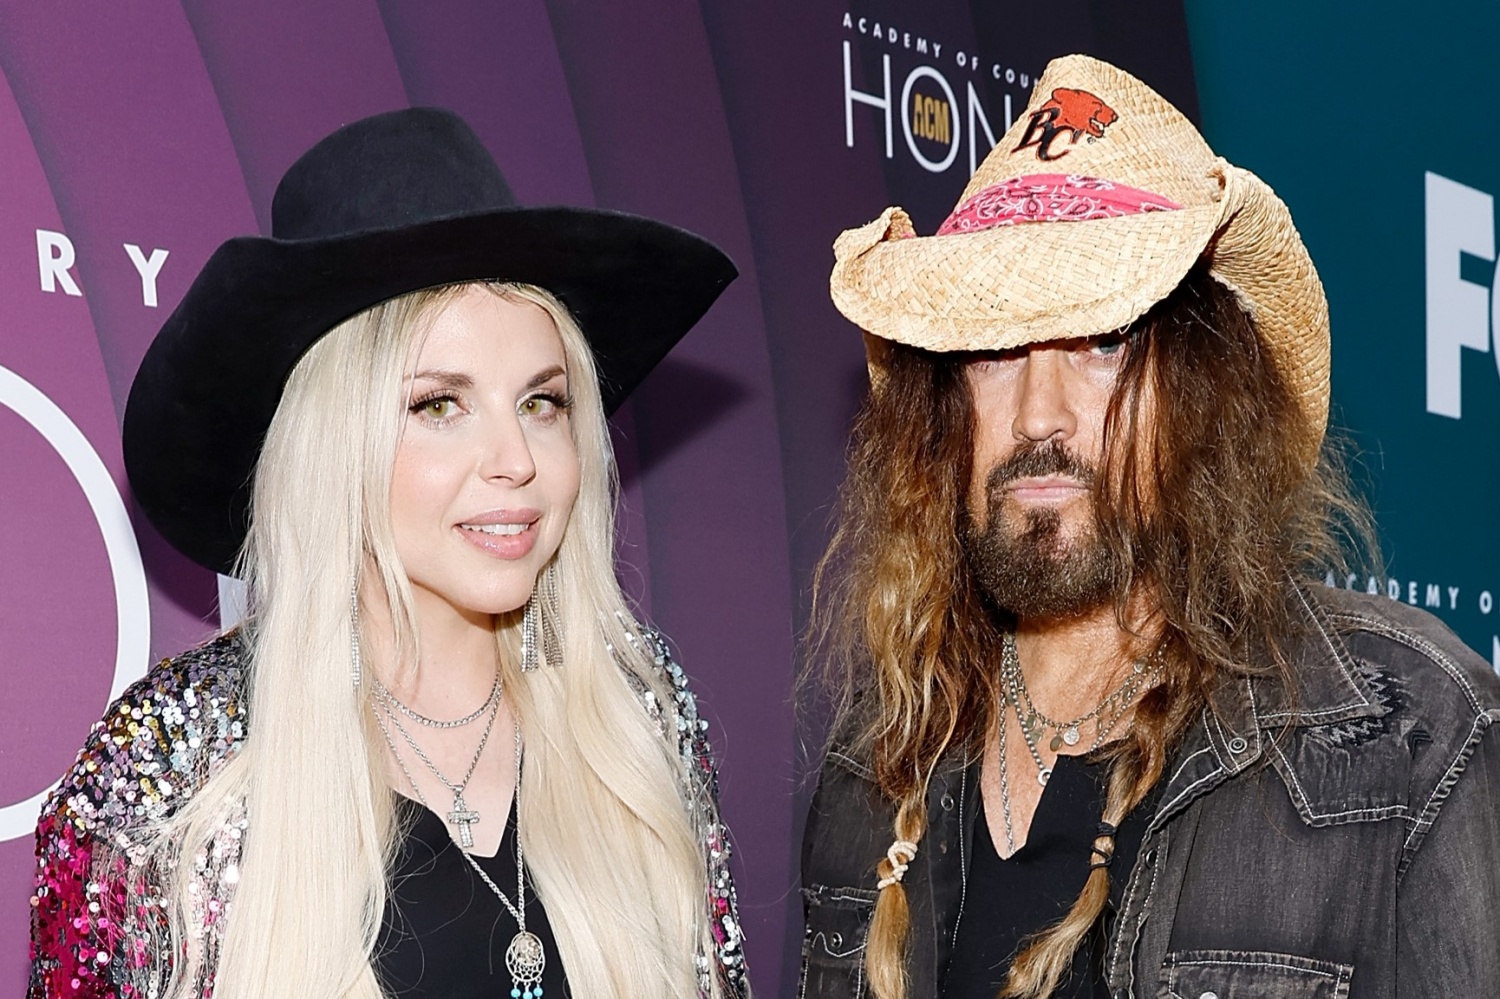 Billy Ray Cyrus drops a bombshell love letter from his estranged wife Firerose begging for reconciliation